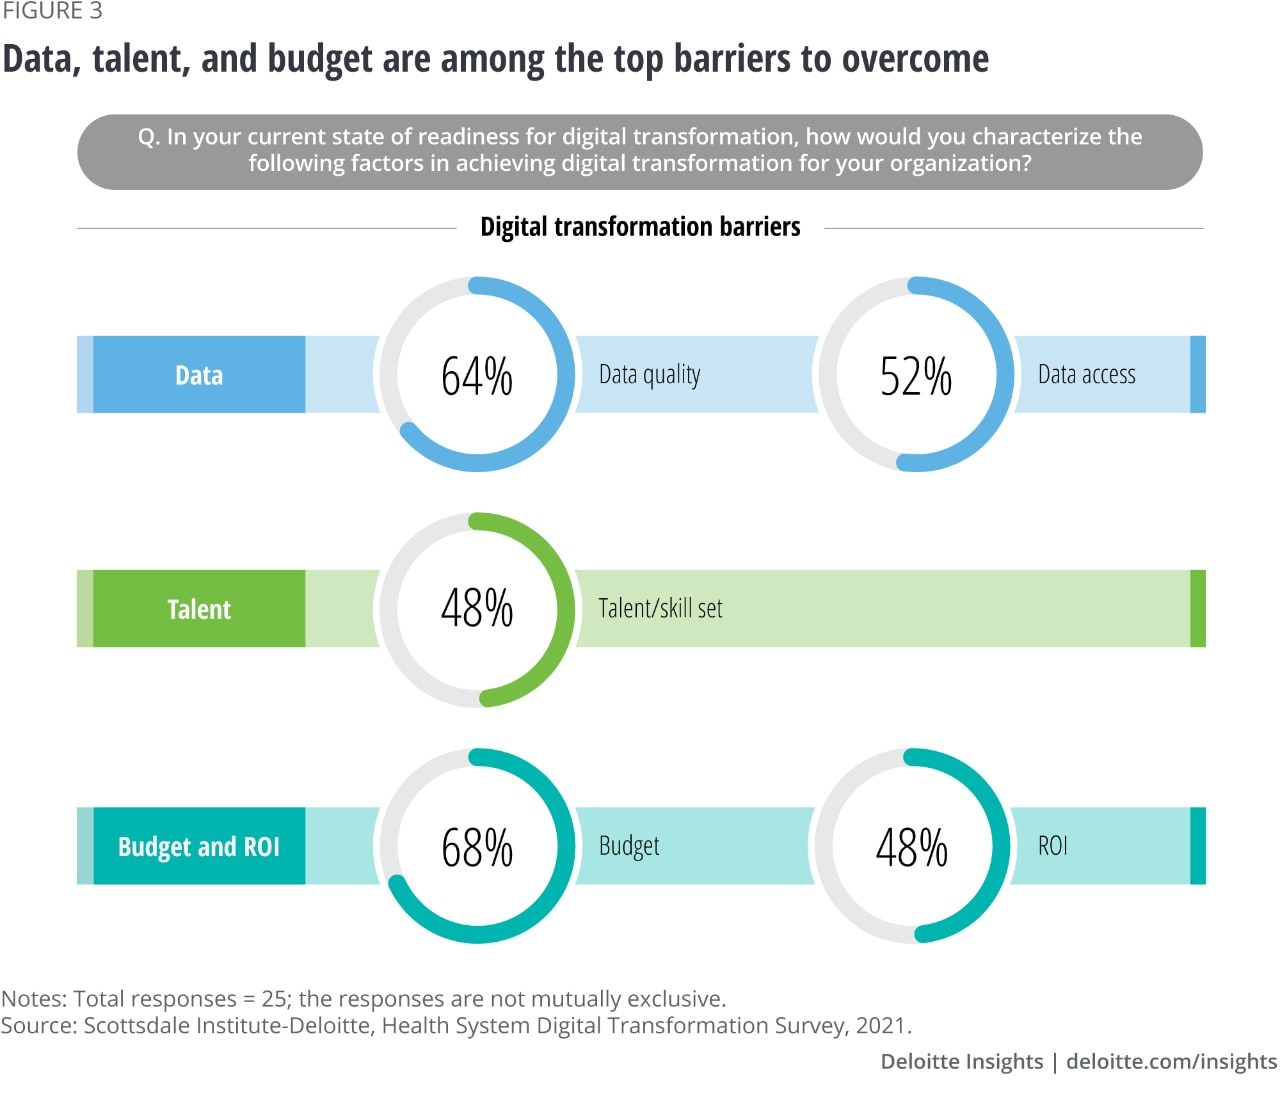 Figure 3. Data, talent, and budget are among top barriers to overcome